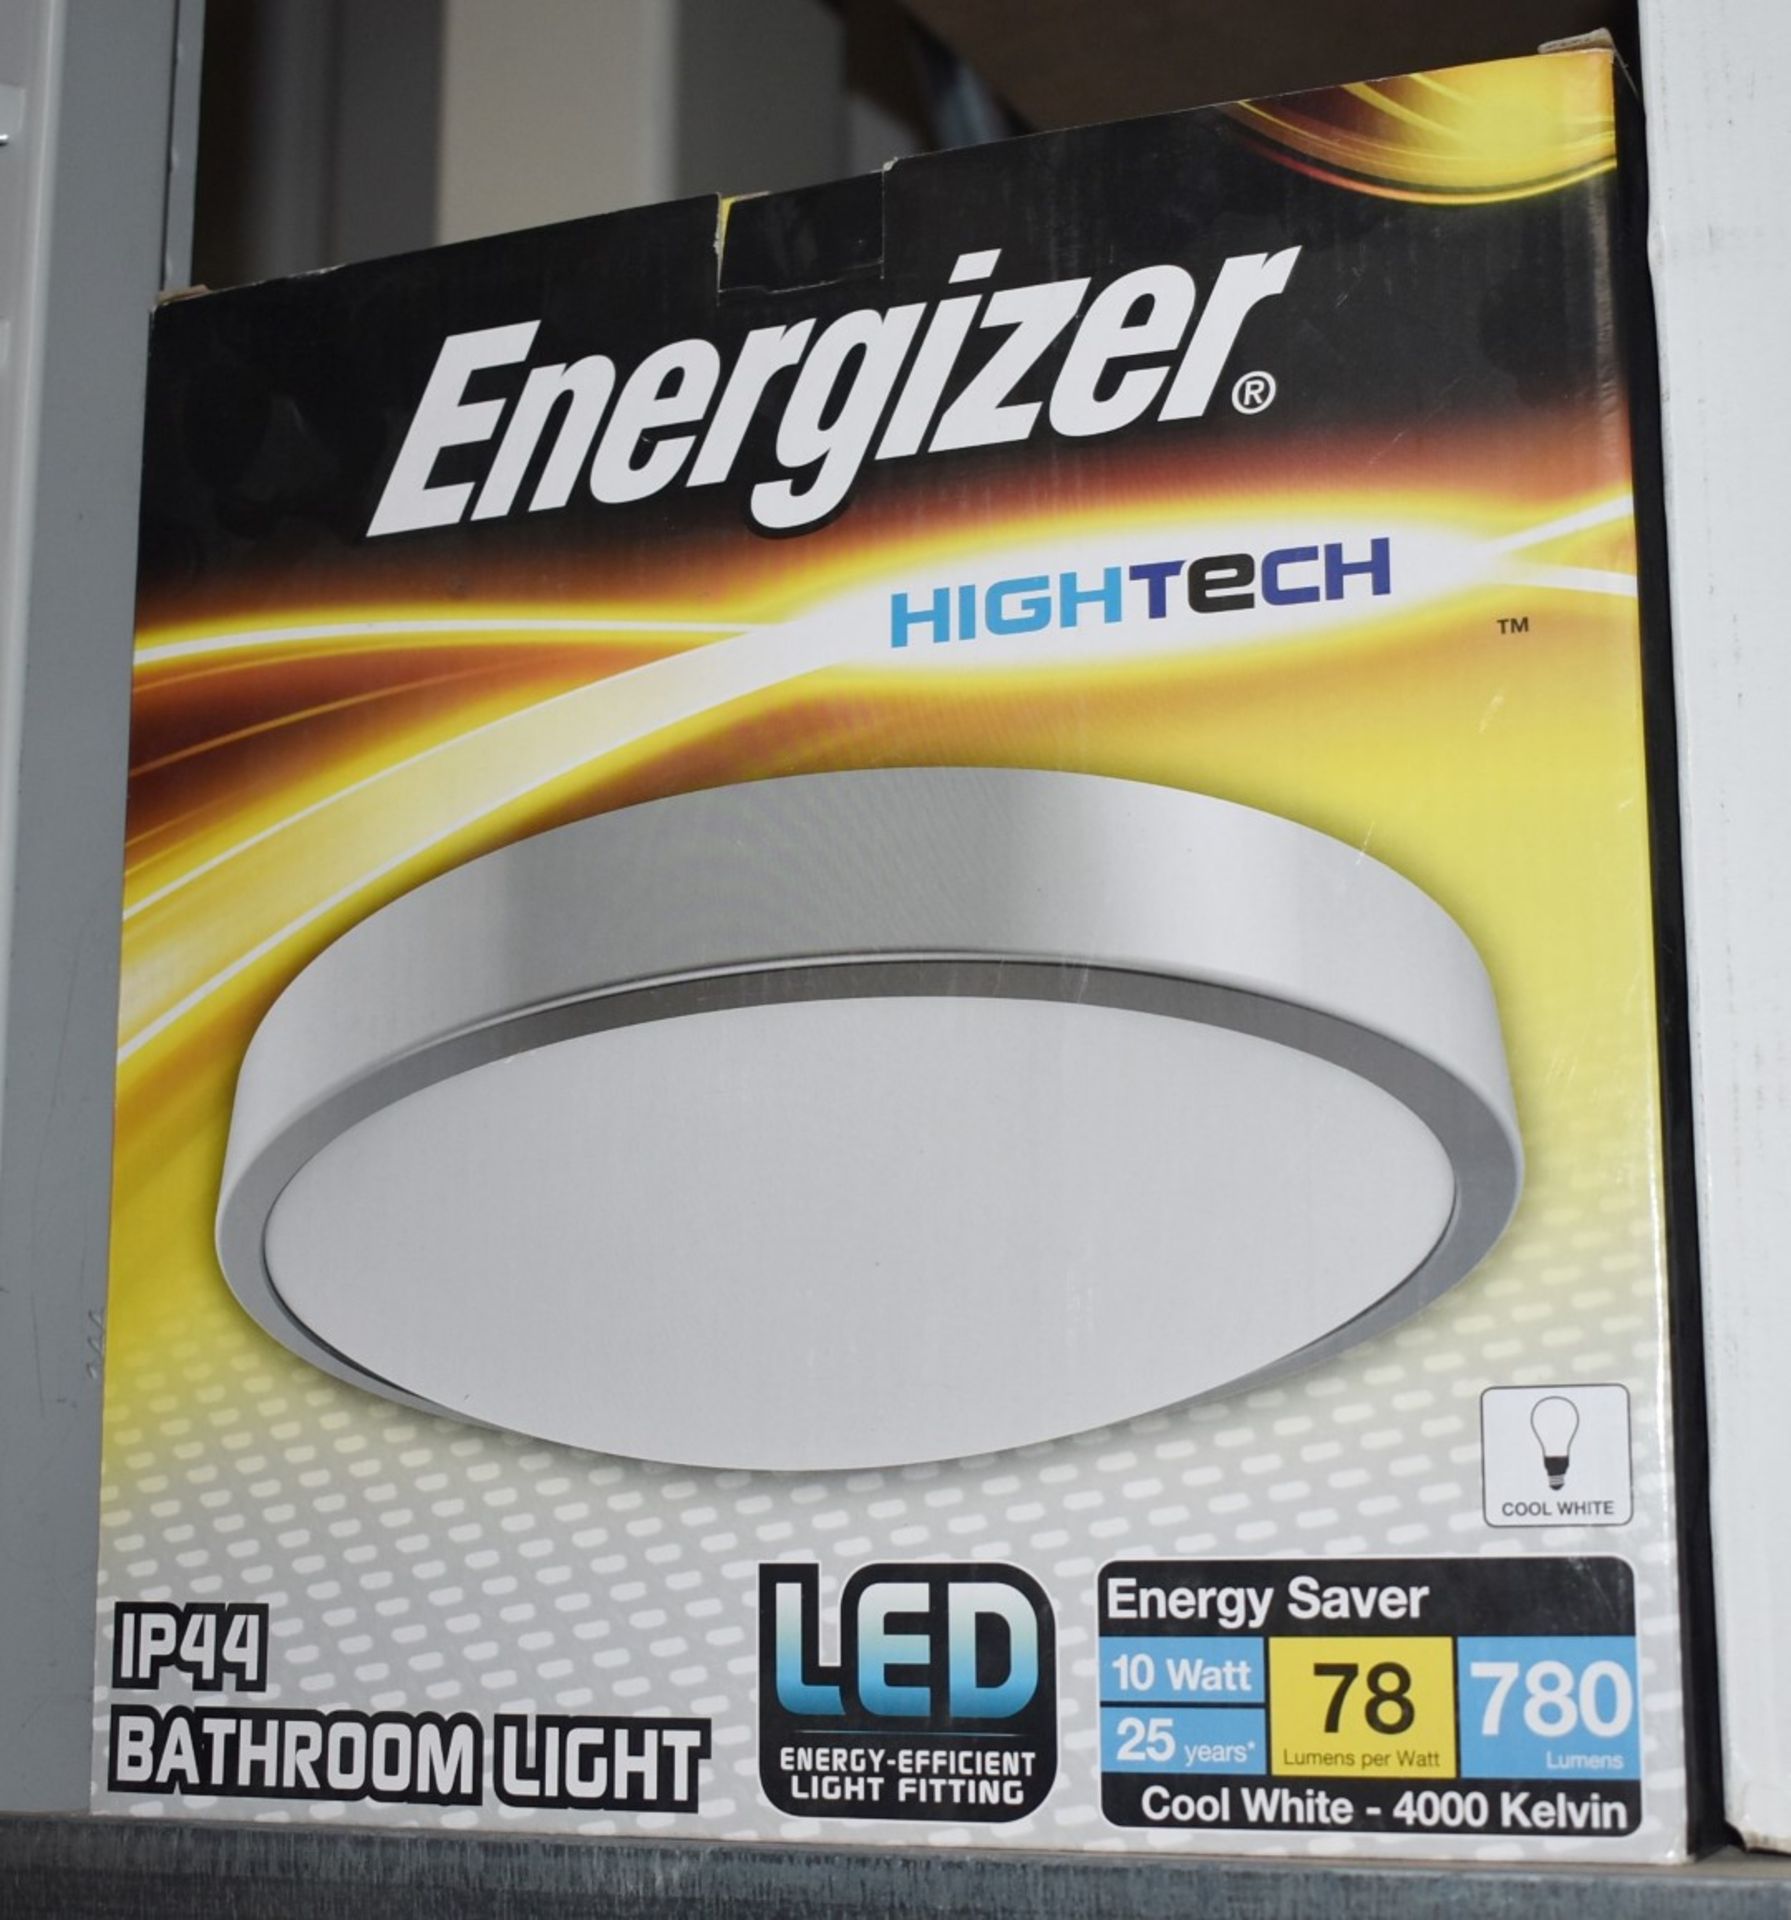 1 x Energizer 10w LED Bathroom Light - IP44 Rated - 4000k Cool White - Silver Finish With Opal - Image 2 of 5